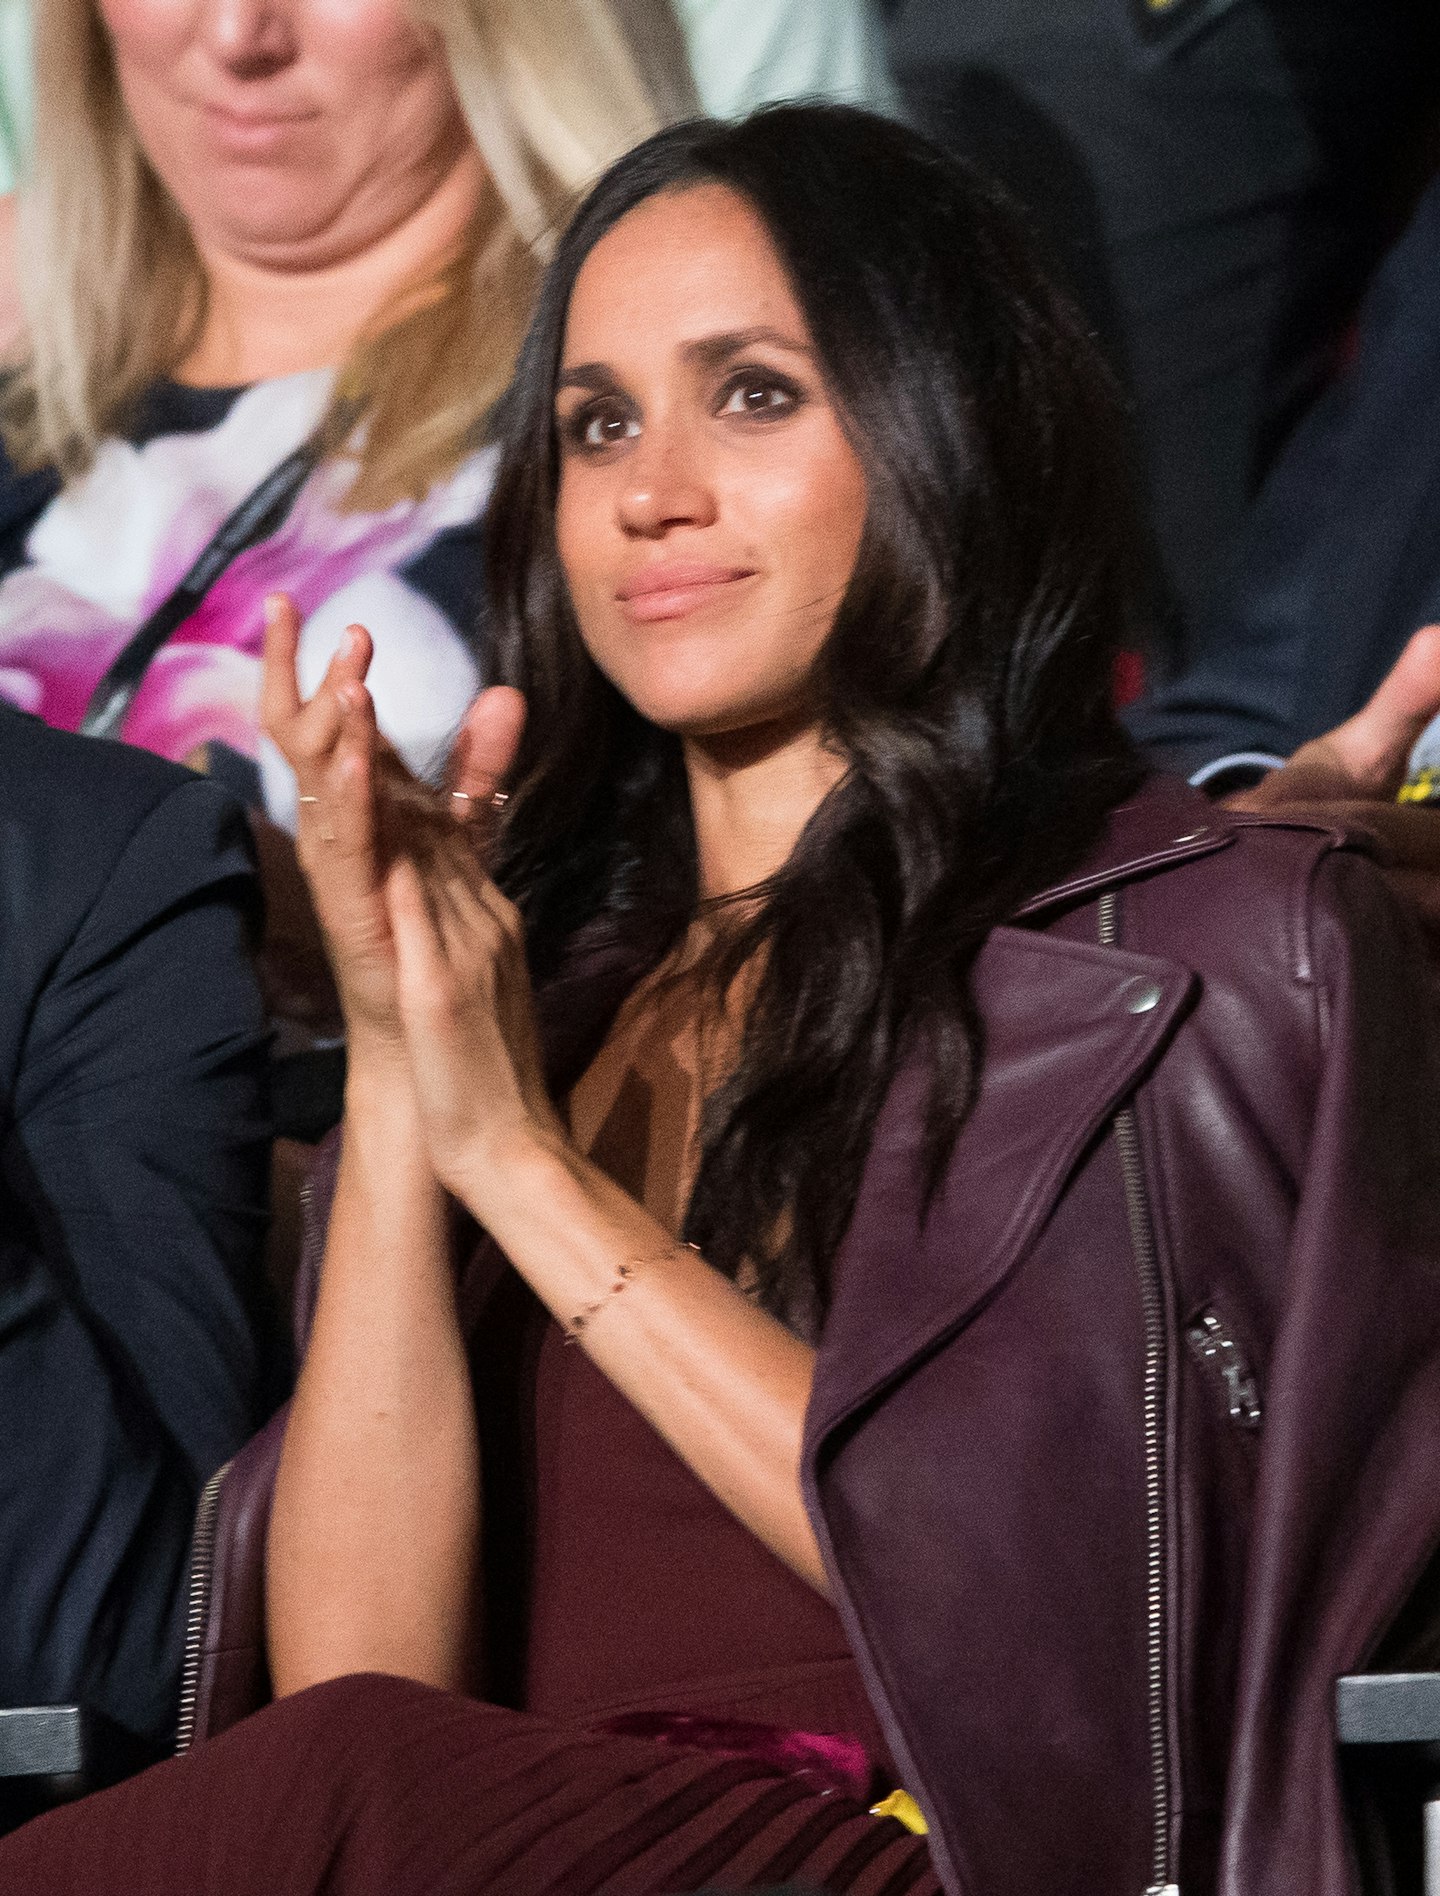 Meghan Markle attends the Invictus Games